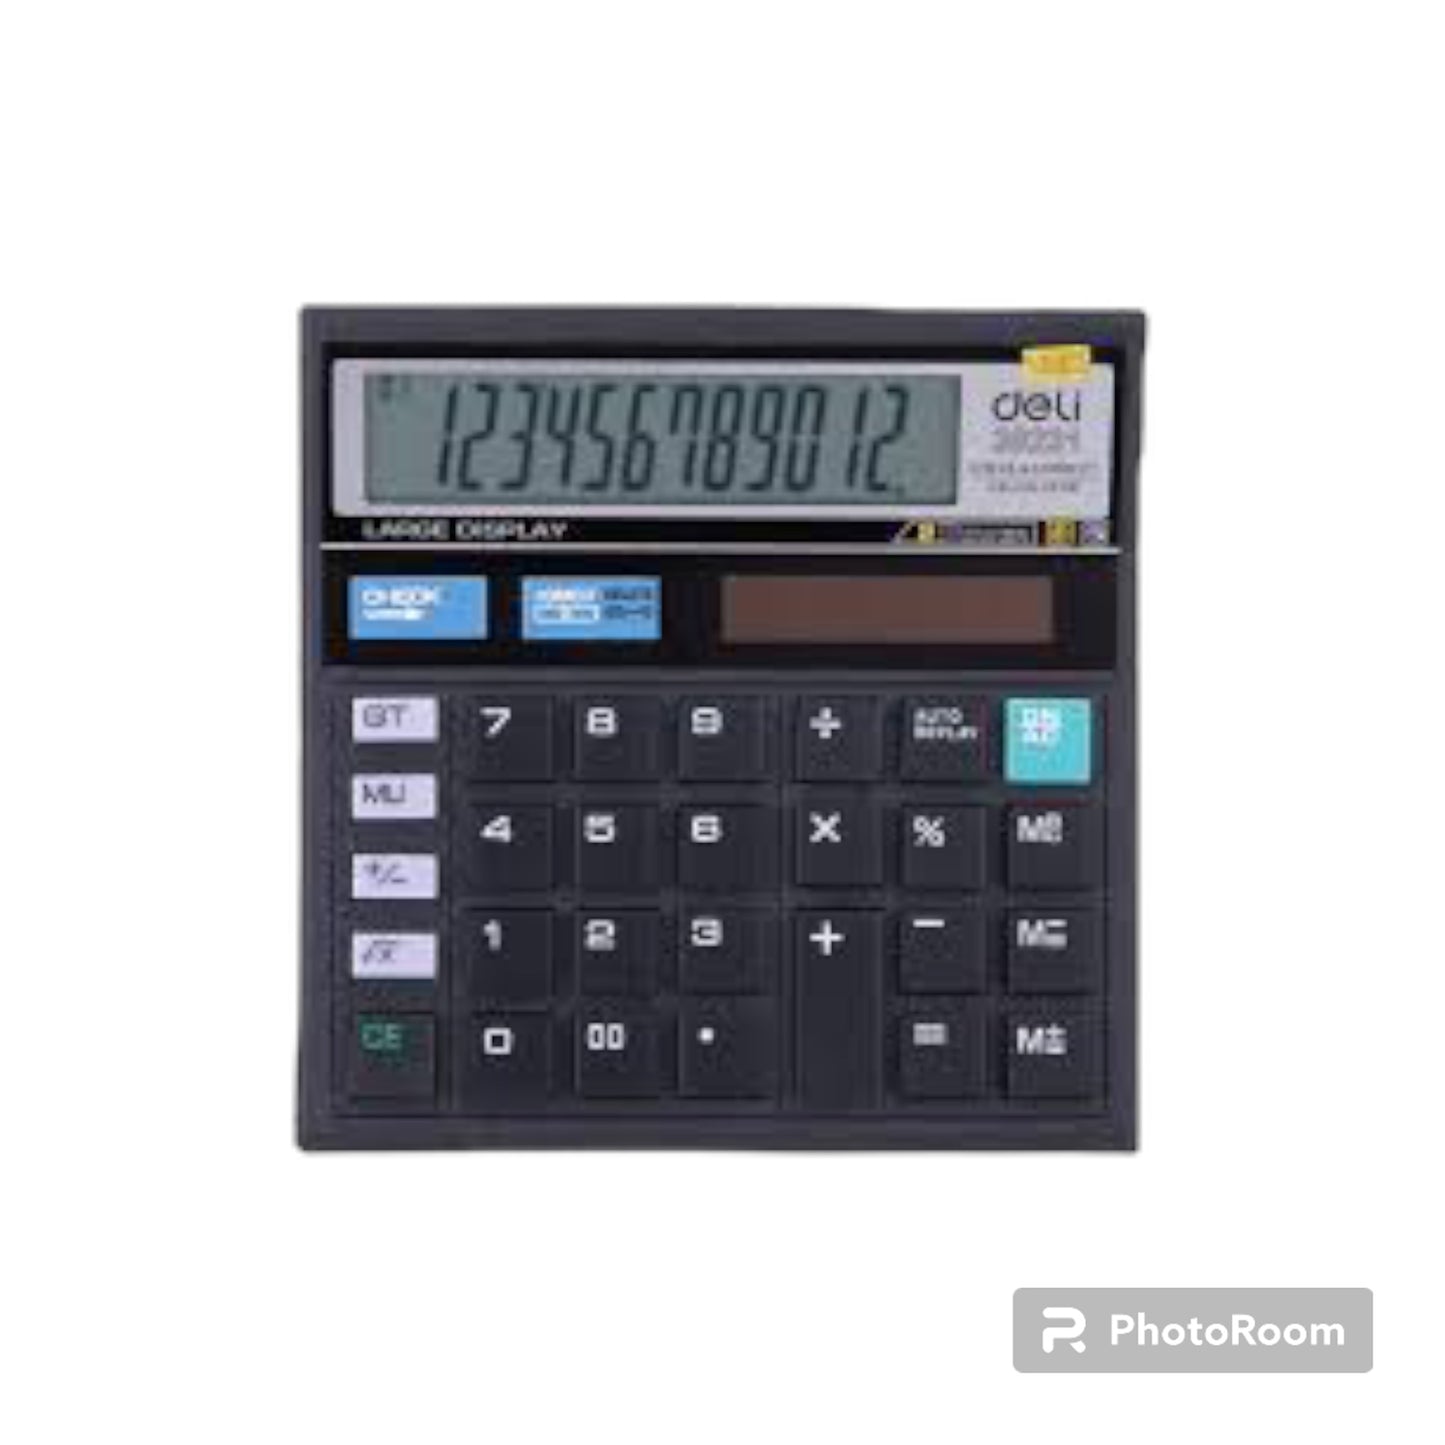 Deli W39231B GT Calculator | 3 Years Warranty | with Steps Check and Correct Function - Black